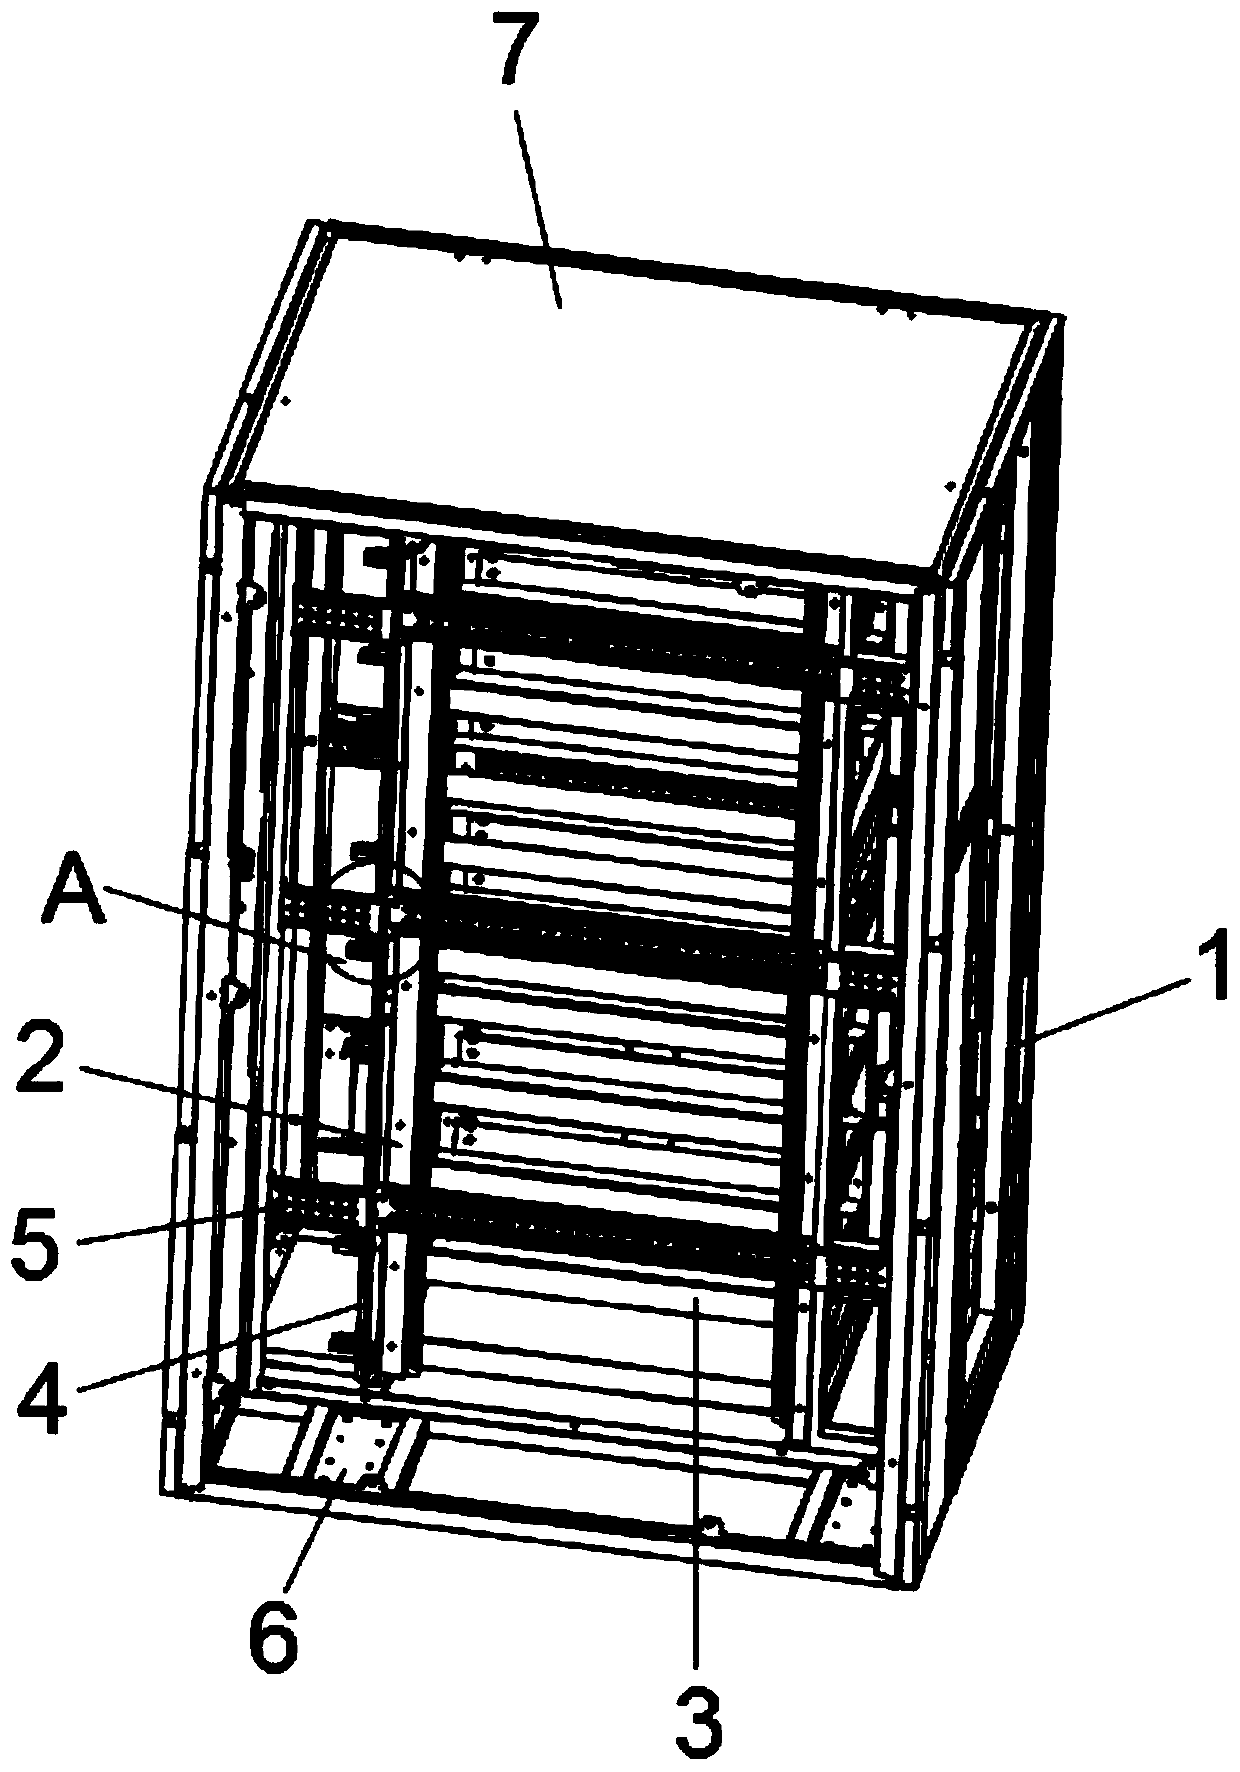 A dust-proof server cabinet for protecting data ports of server equipment